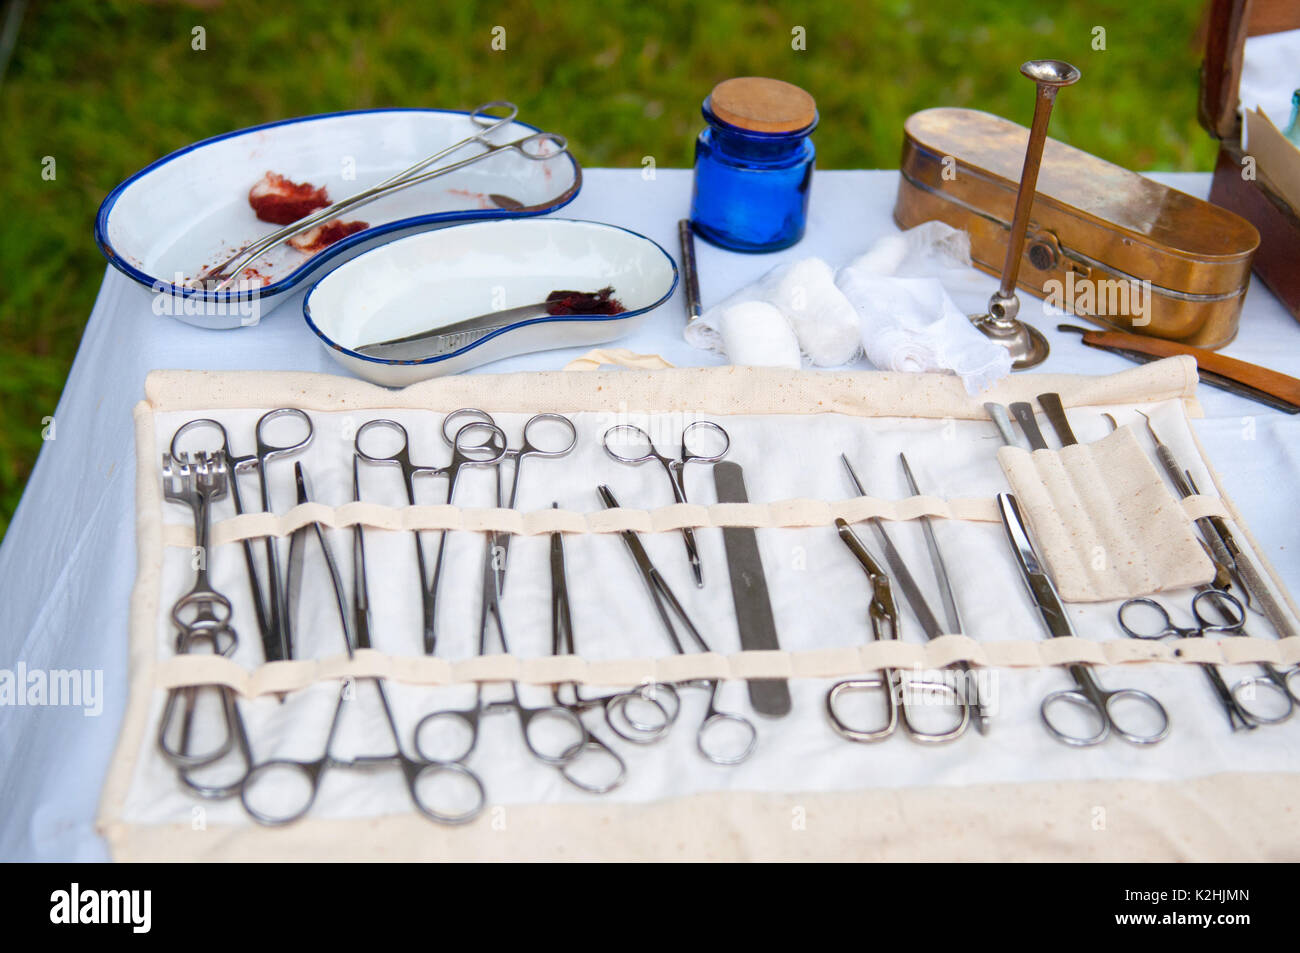 Ancient medical equipment. Medical surgical table. Stock Photo